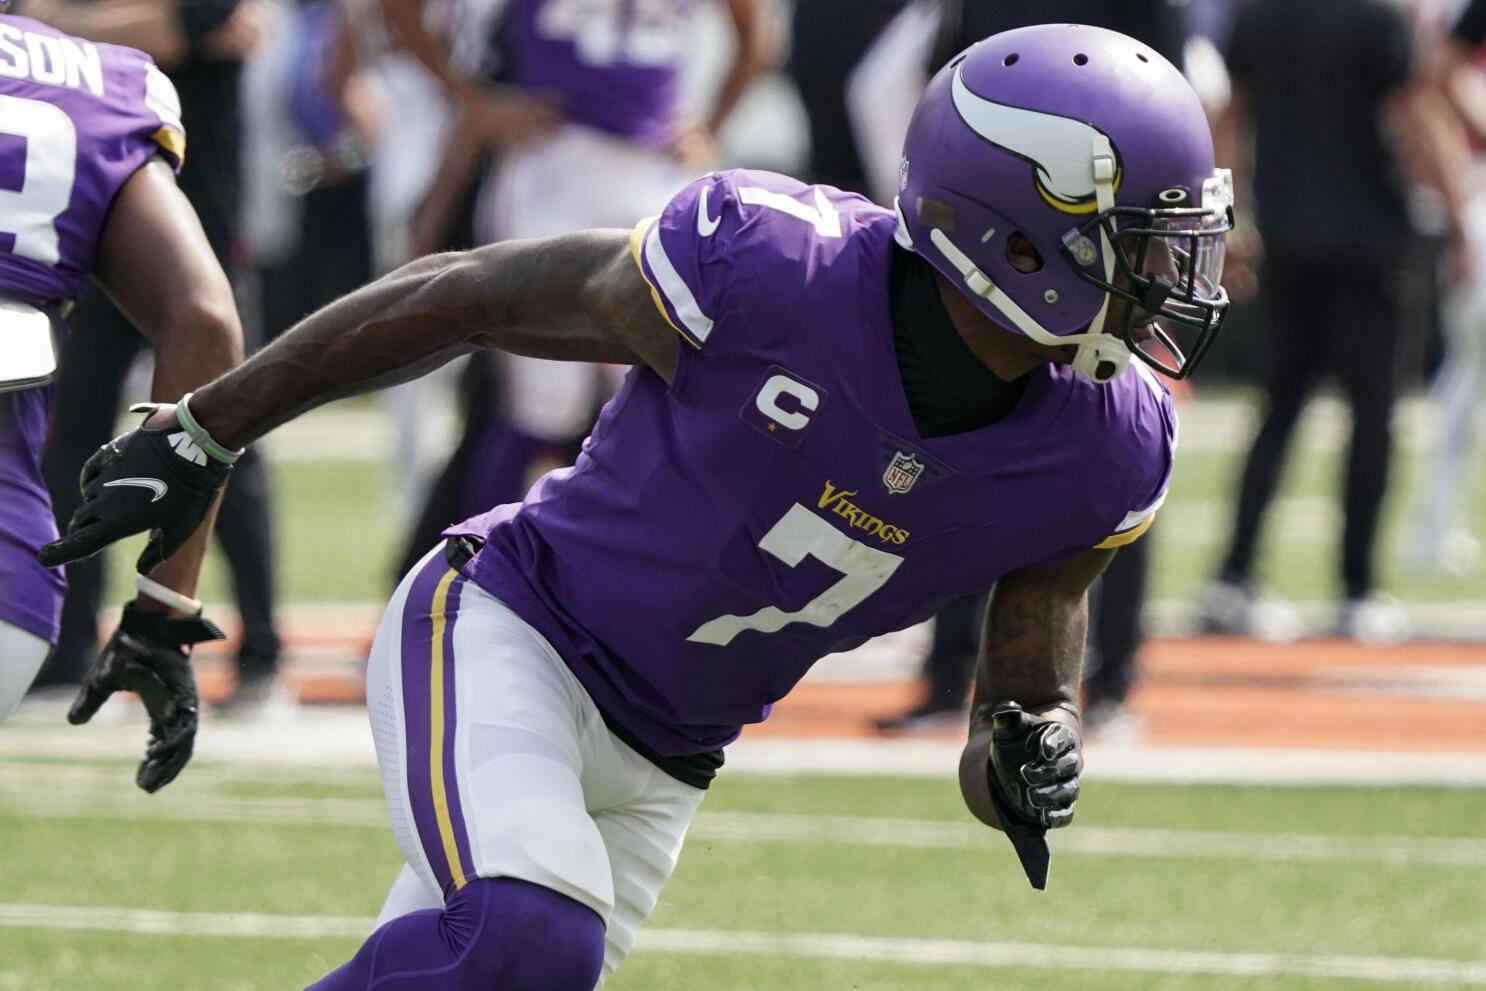 Born leader' Peterson guides Vikings D, to visit Cards next